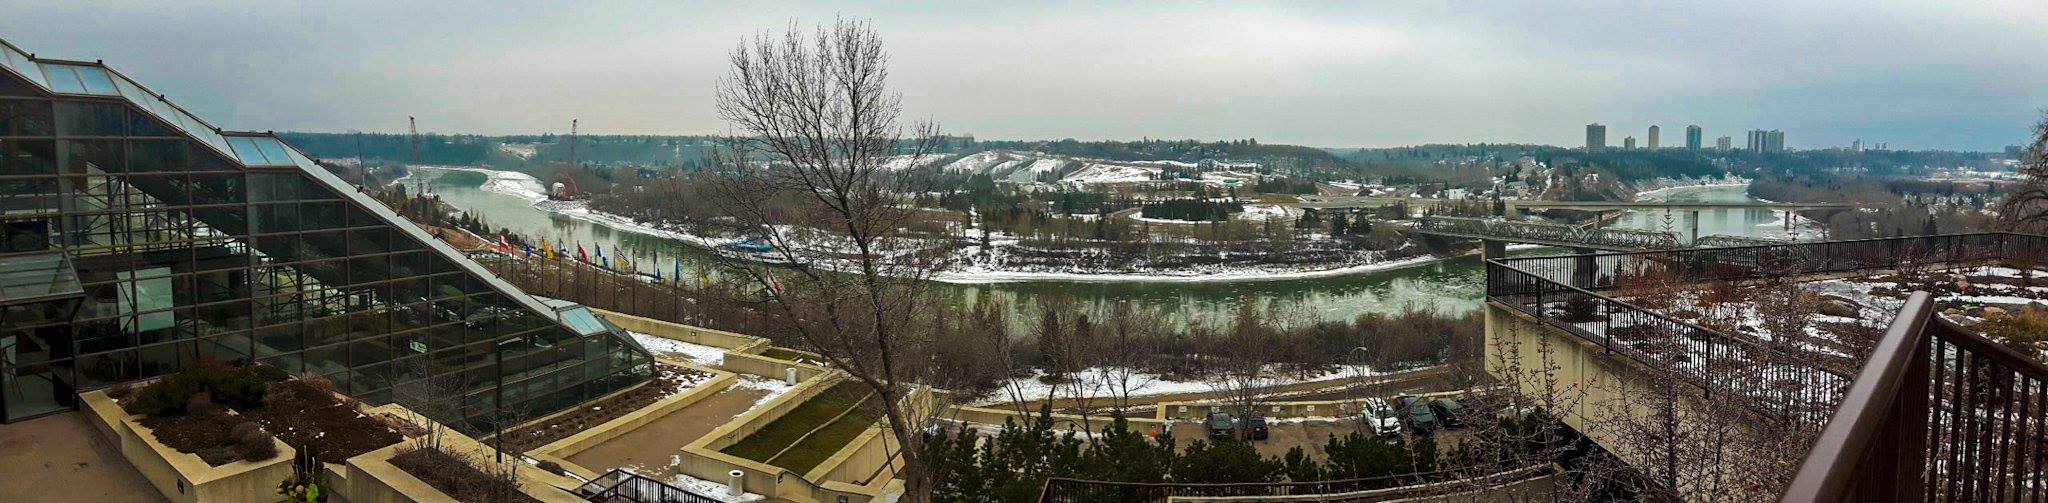 panorama of a riverfront. it's winter and there is snow everywhere, the river partly iced over. the greens, blues, and teals in the water and overcast sky are very vibrant. in the forefront of the image there are some buildings, steps, and little planters. there are bridges crossing the river at each end